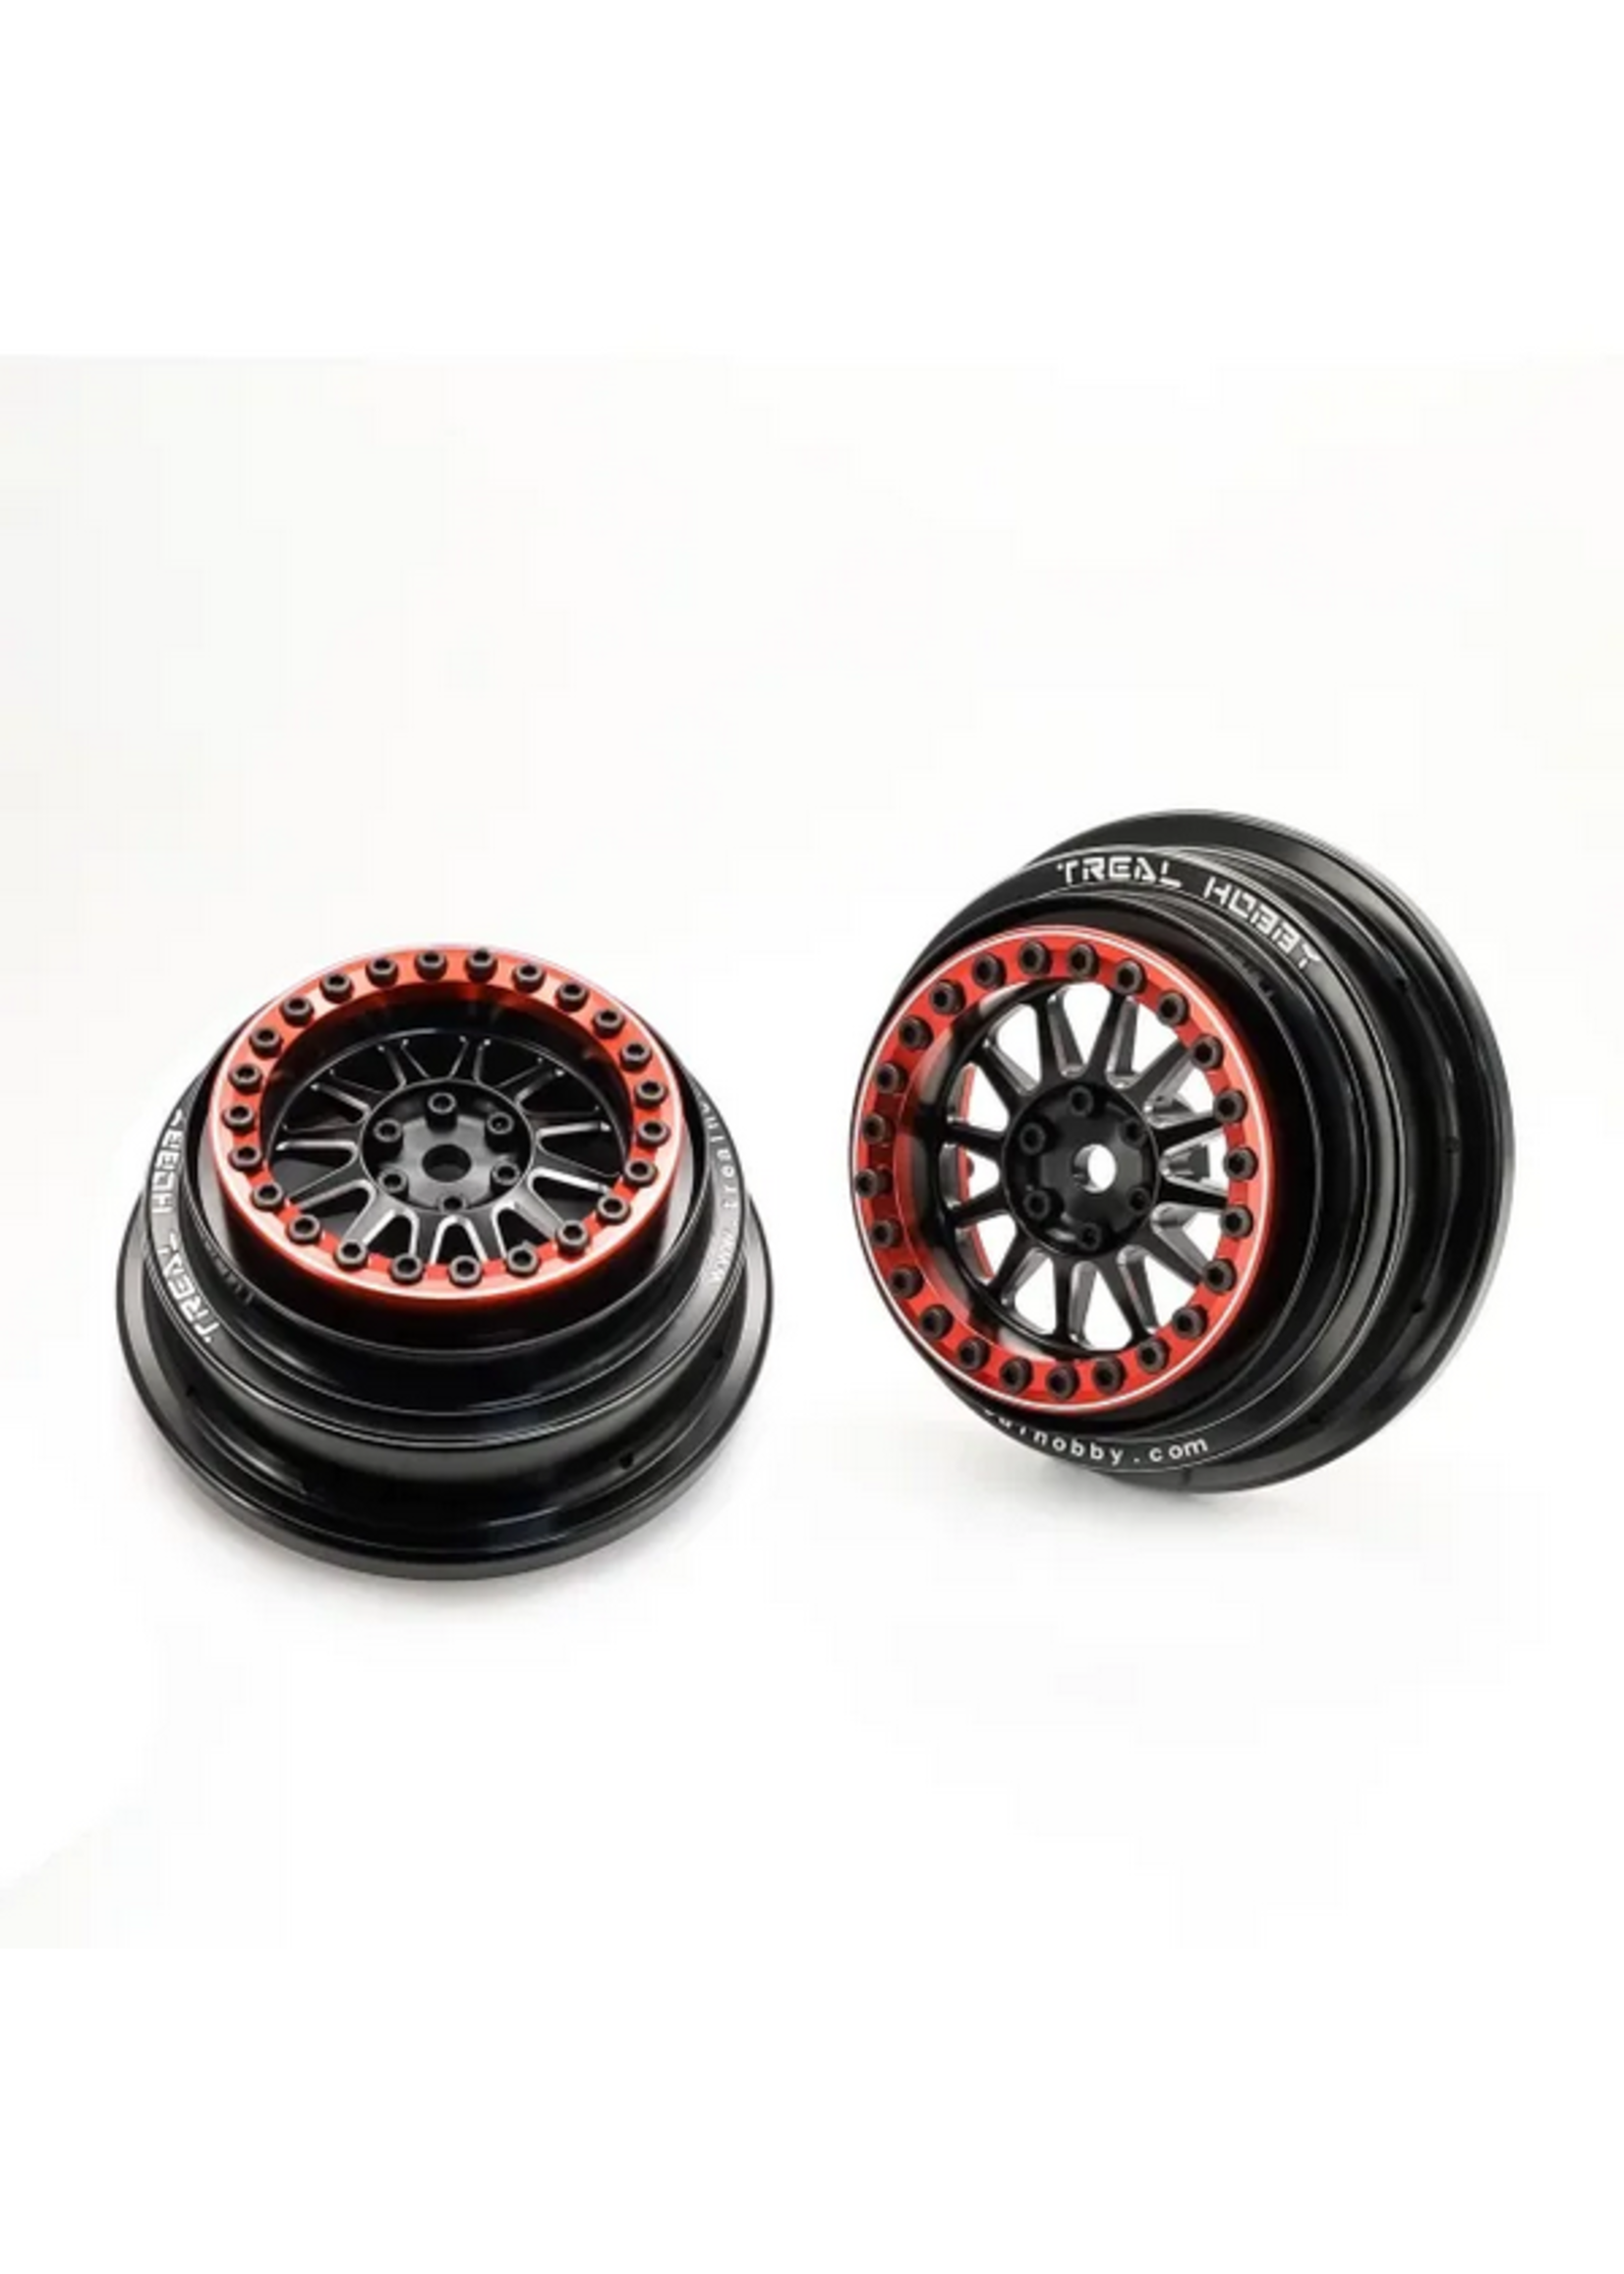 Treal Treal Aluminium Beadlock Wheels 1:7 RC Wheel Hubs Rims for UDR Compatible with Stock Factory Tires-V1 Red/Black